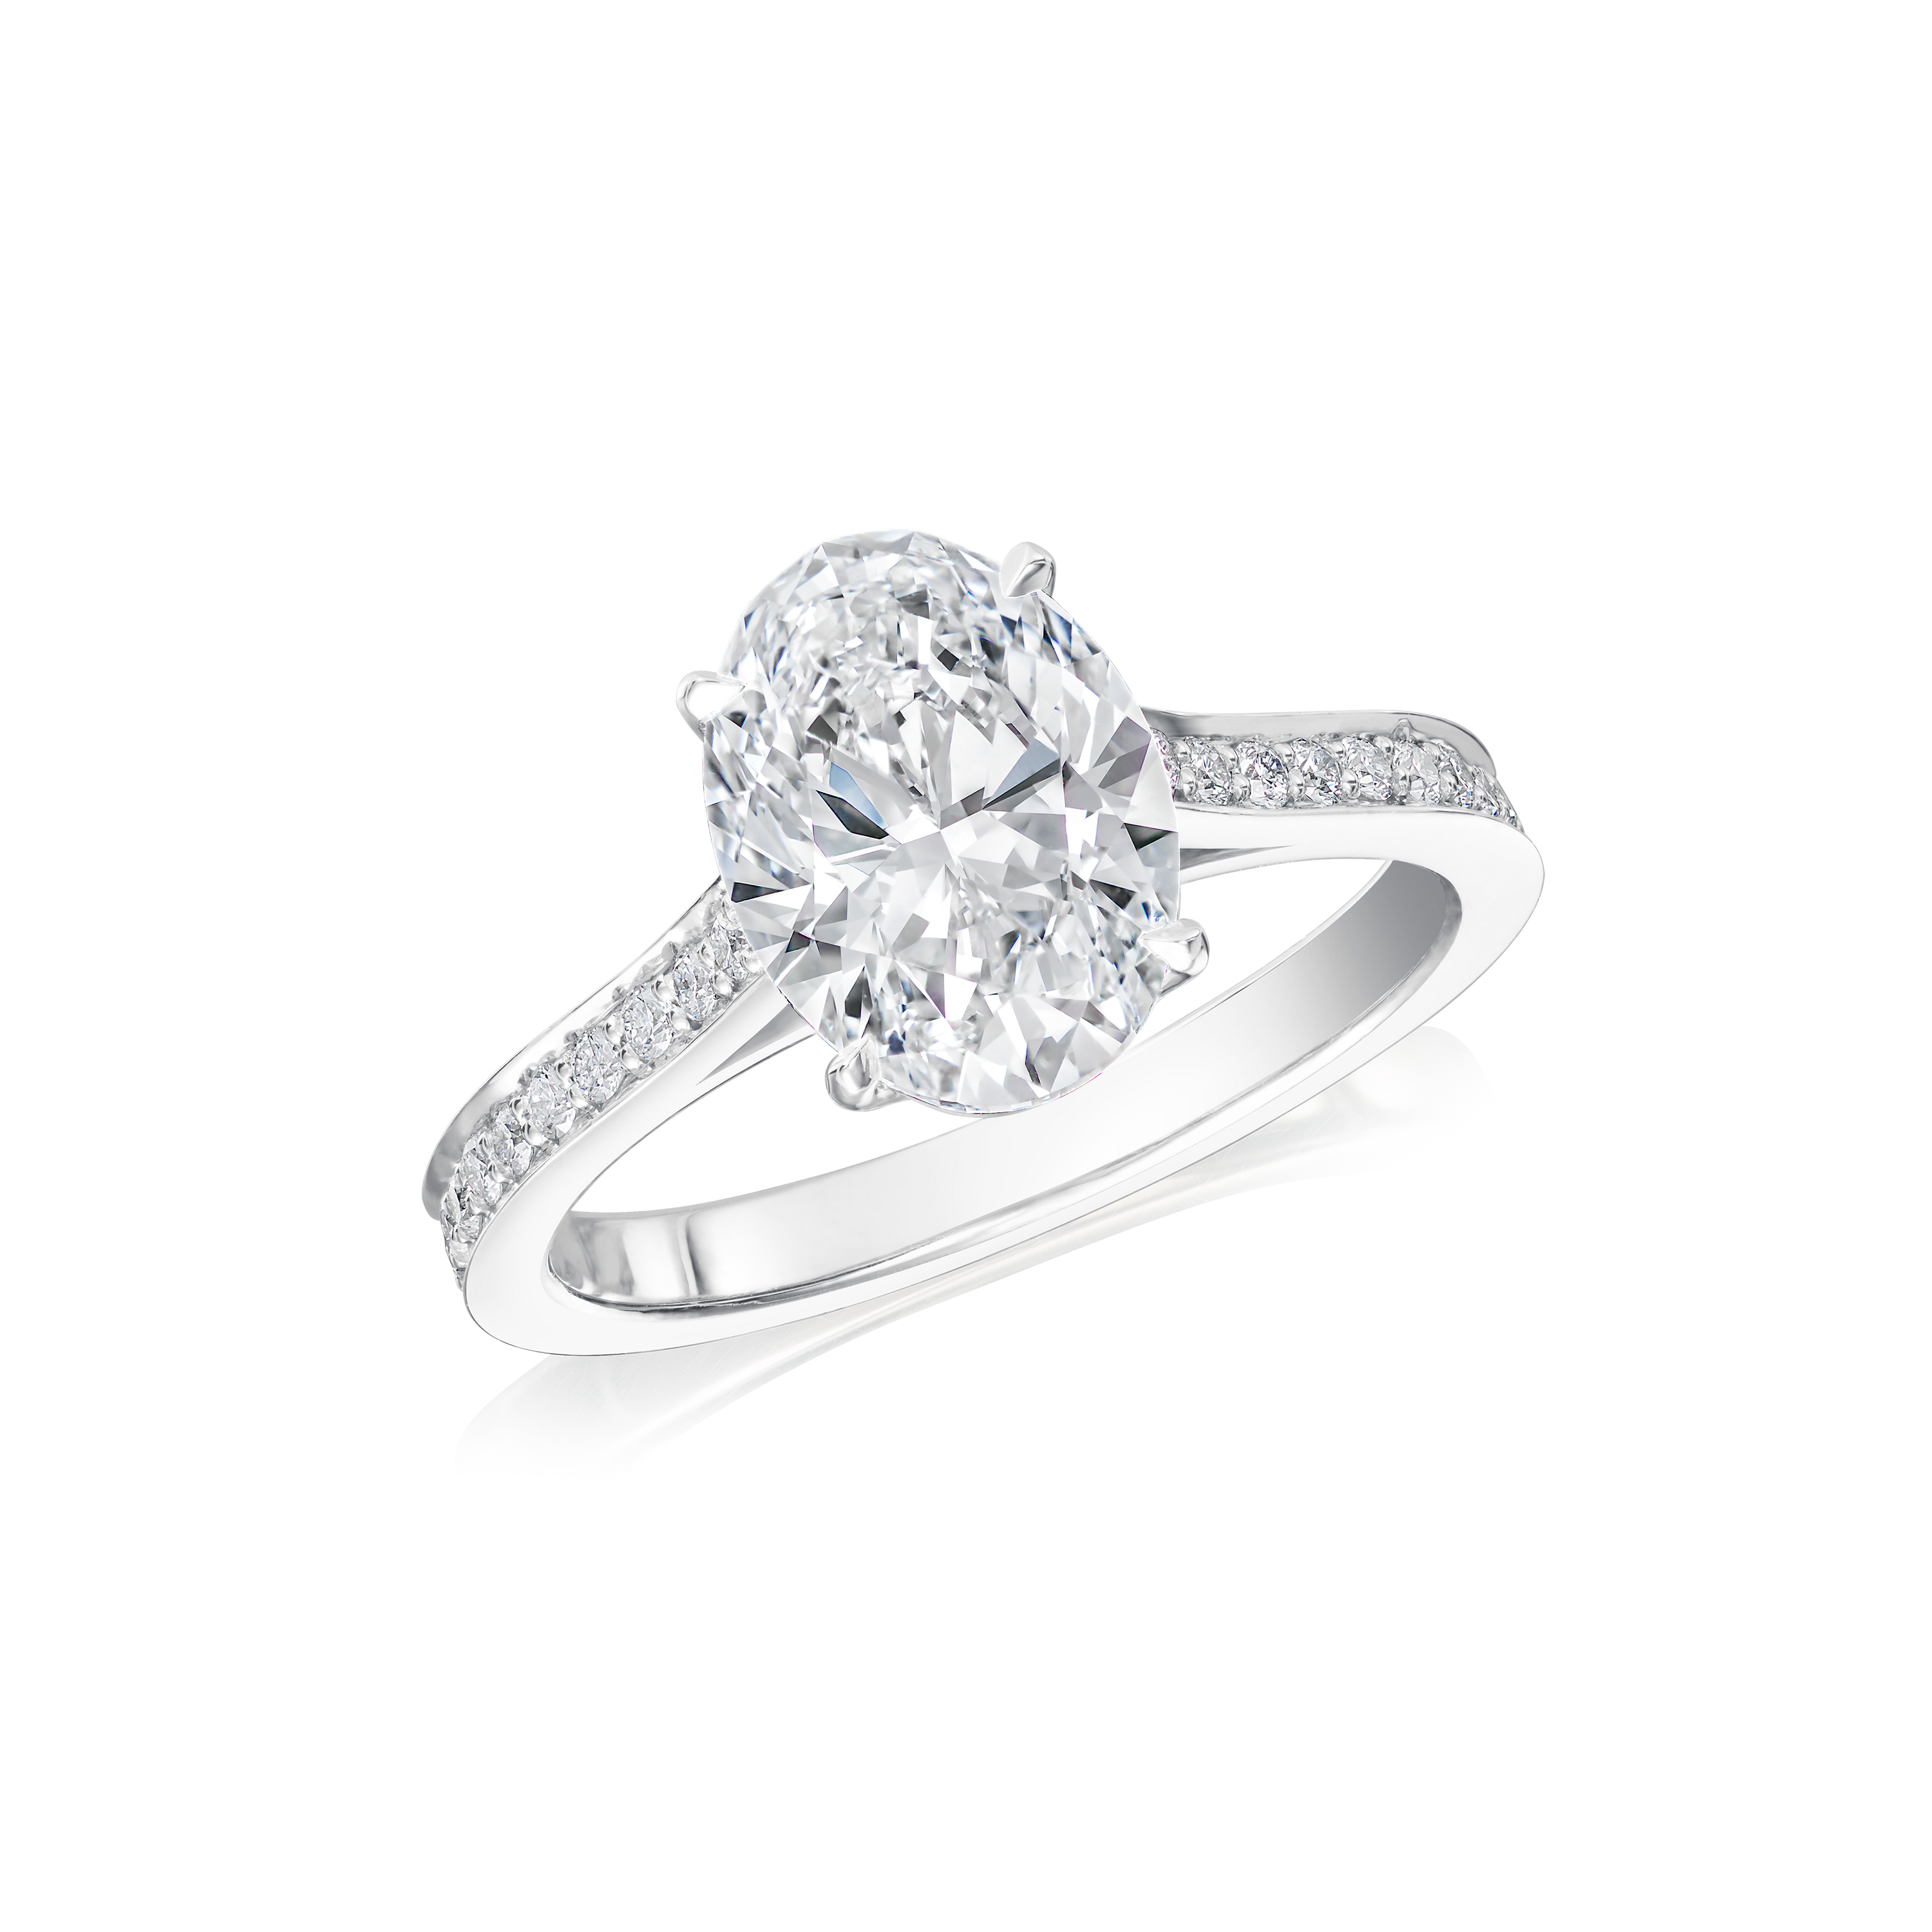 Oval Diamond Engagement Ring With Diamond Set Shoulders